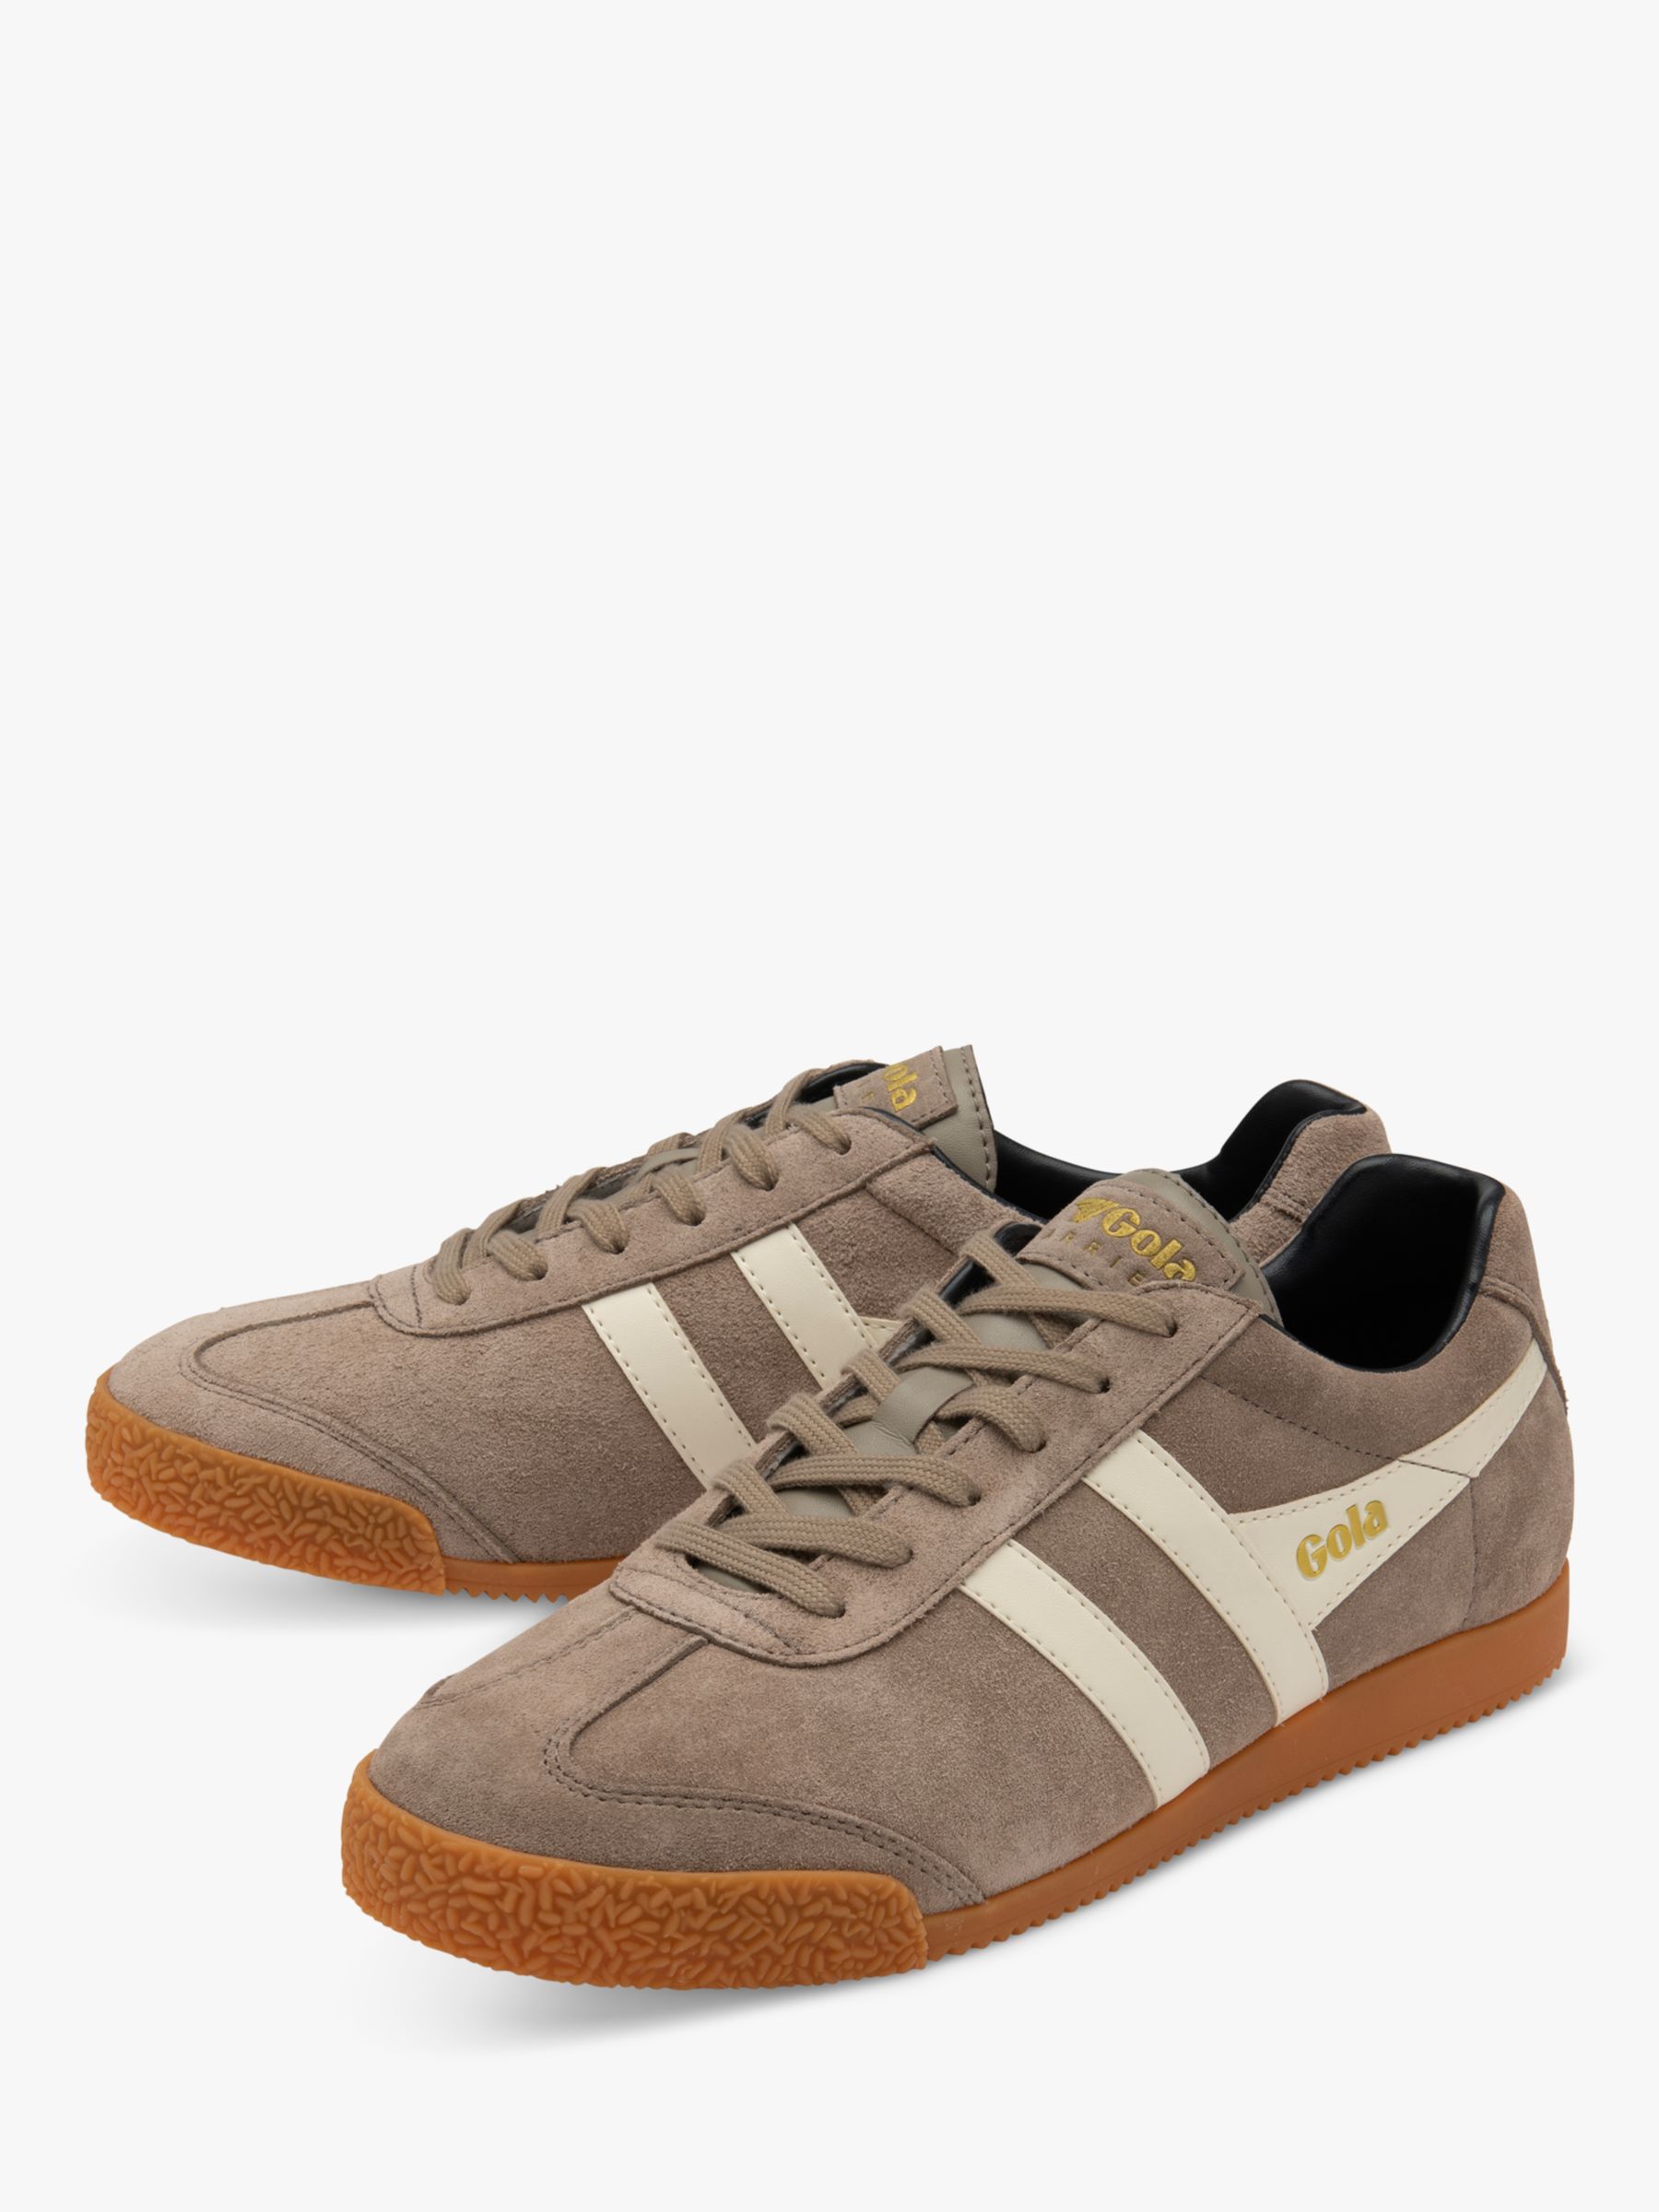 Buy Gola Classics Harrier Suede Lace Up Trainers Online at johnlewis.com